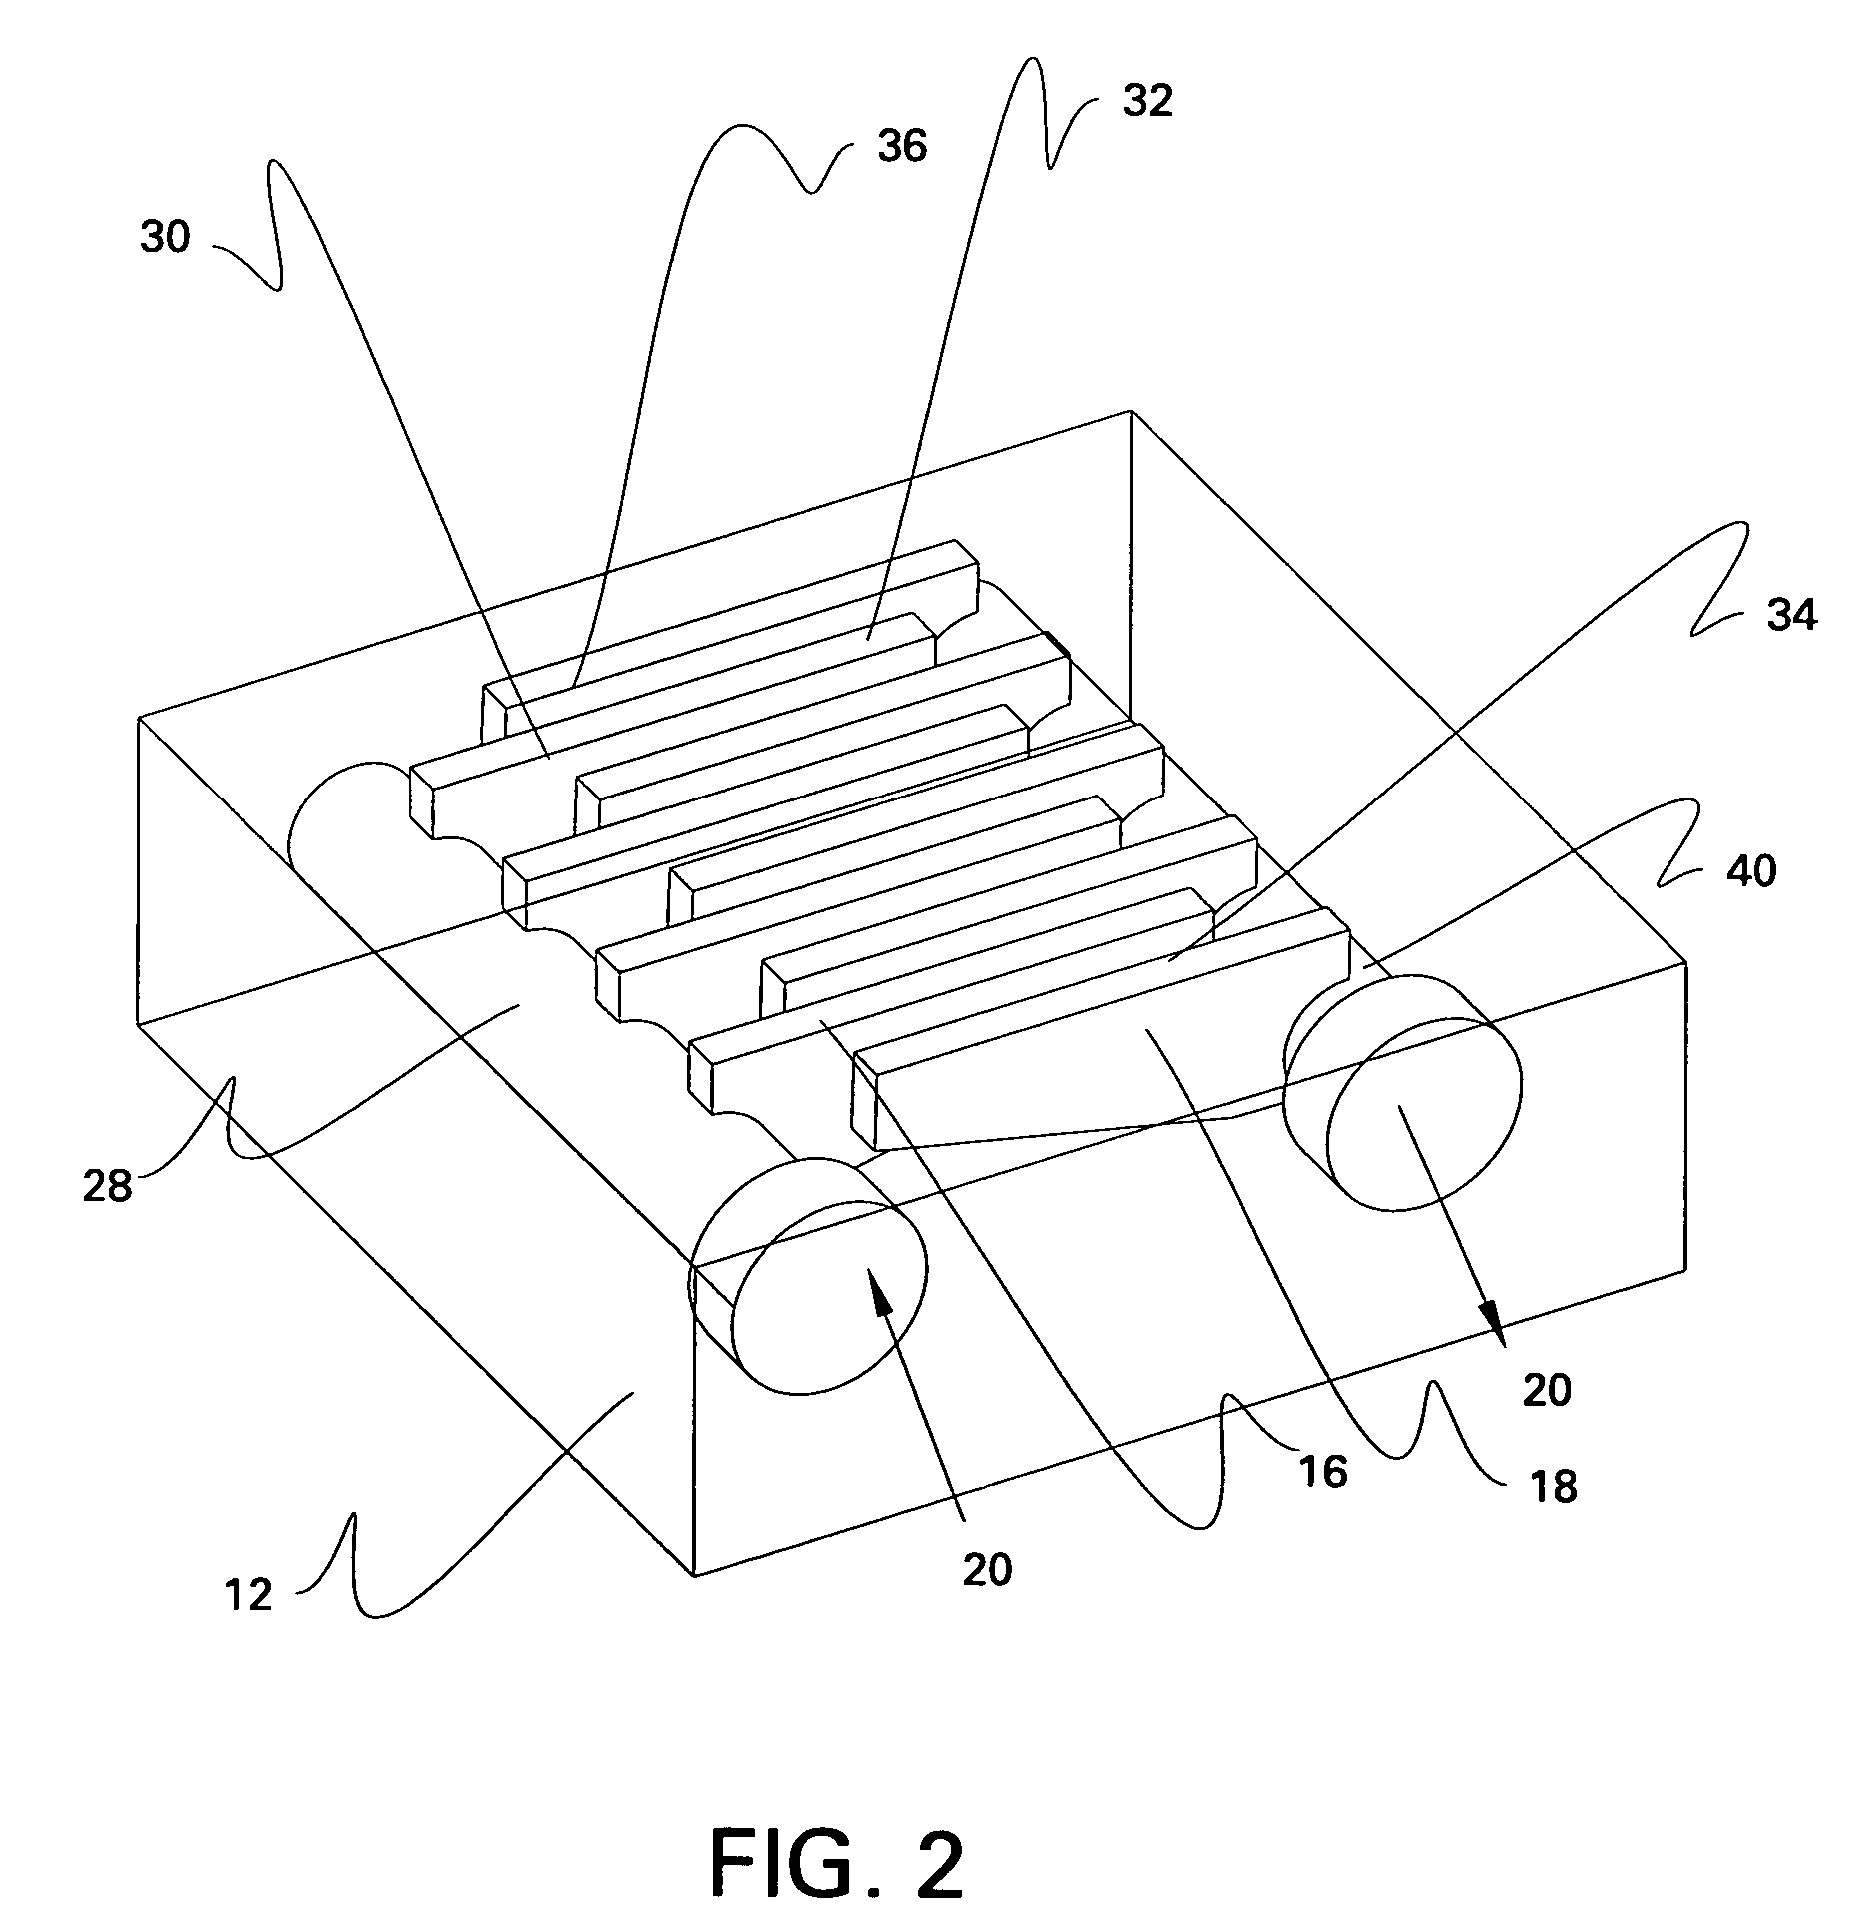 Heat sink with microchannel cooling for power devices